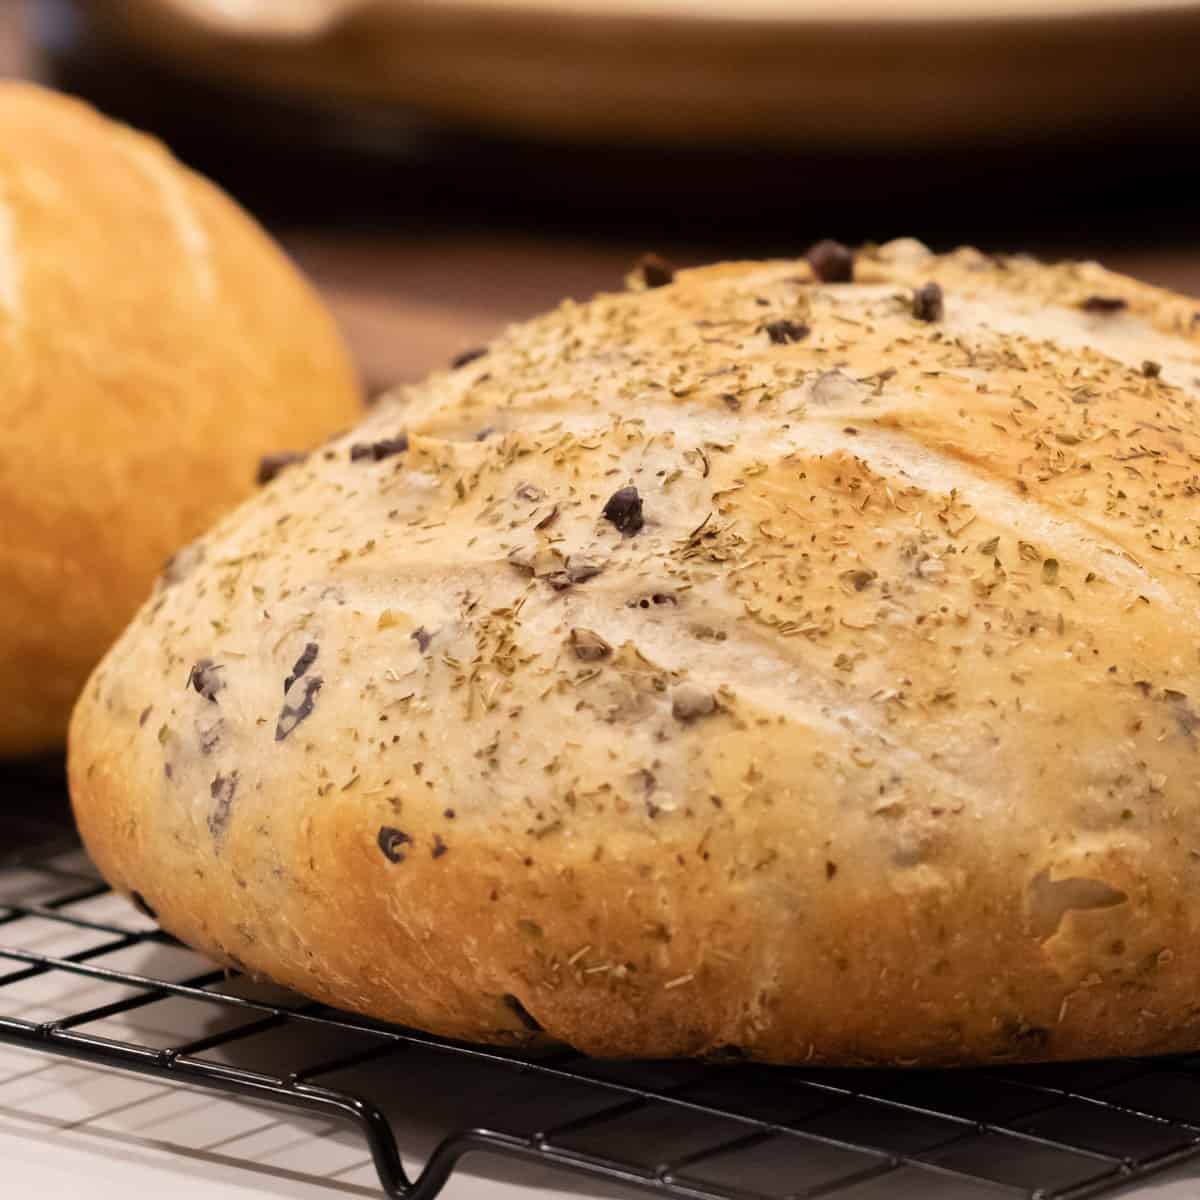 Close up picture of rustic bread with oregano sprinkled on top.